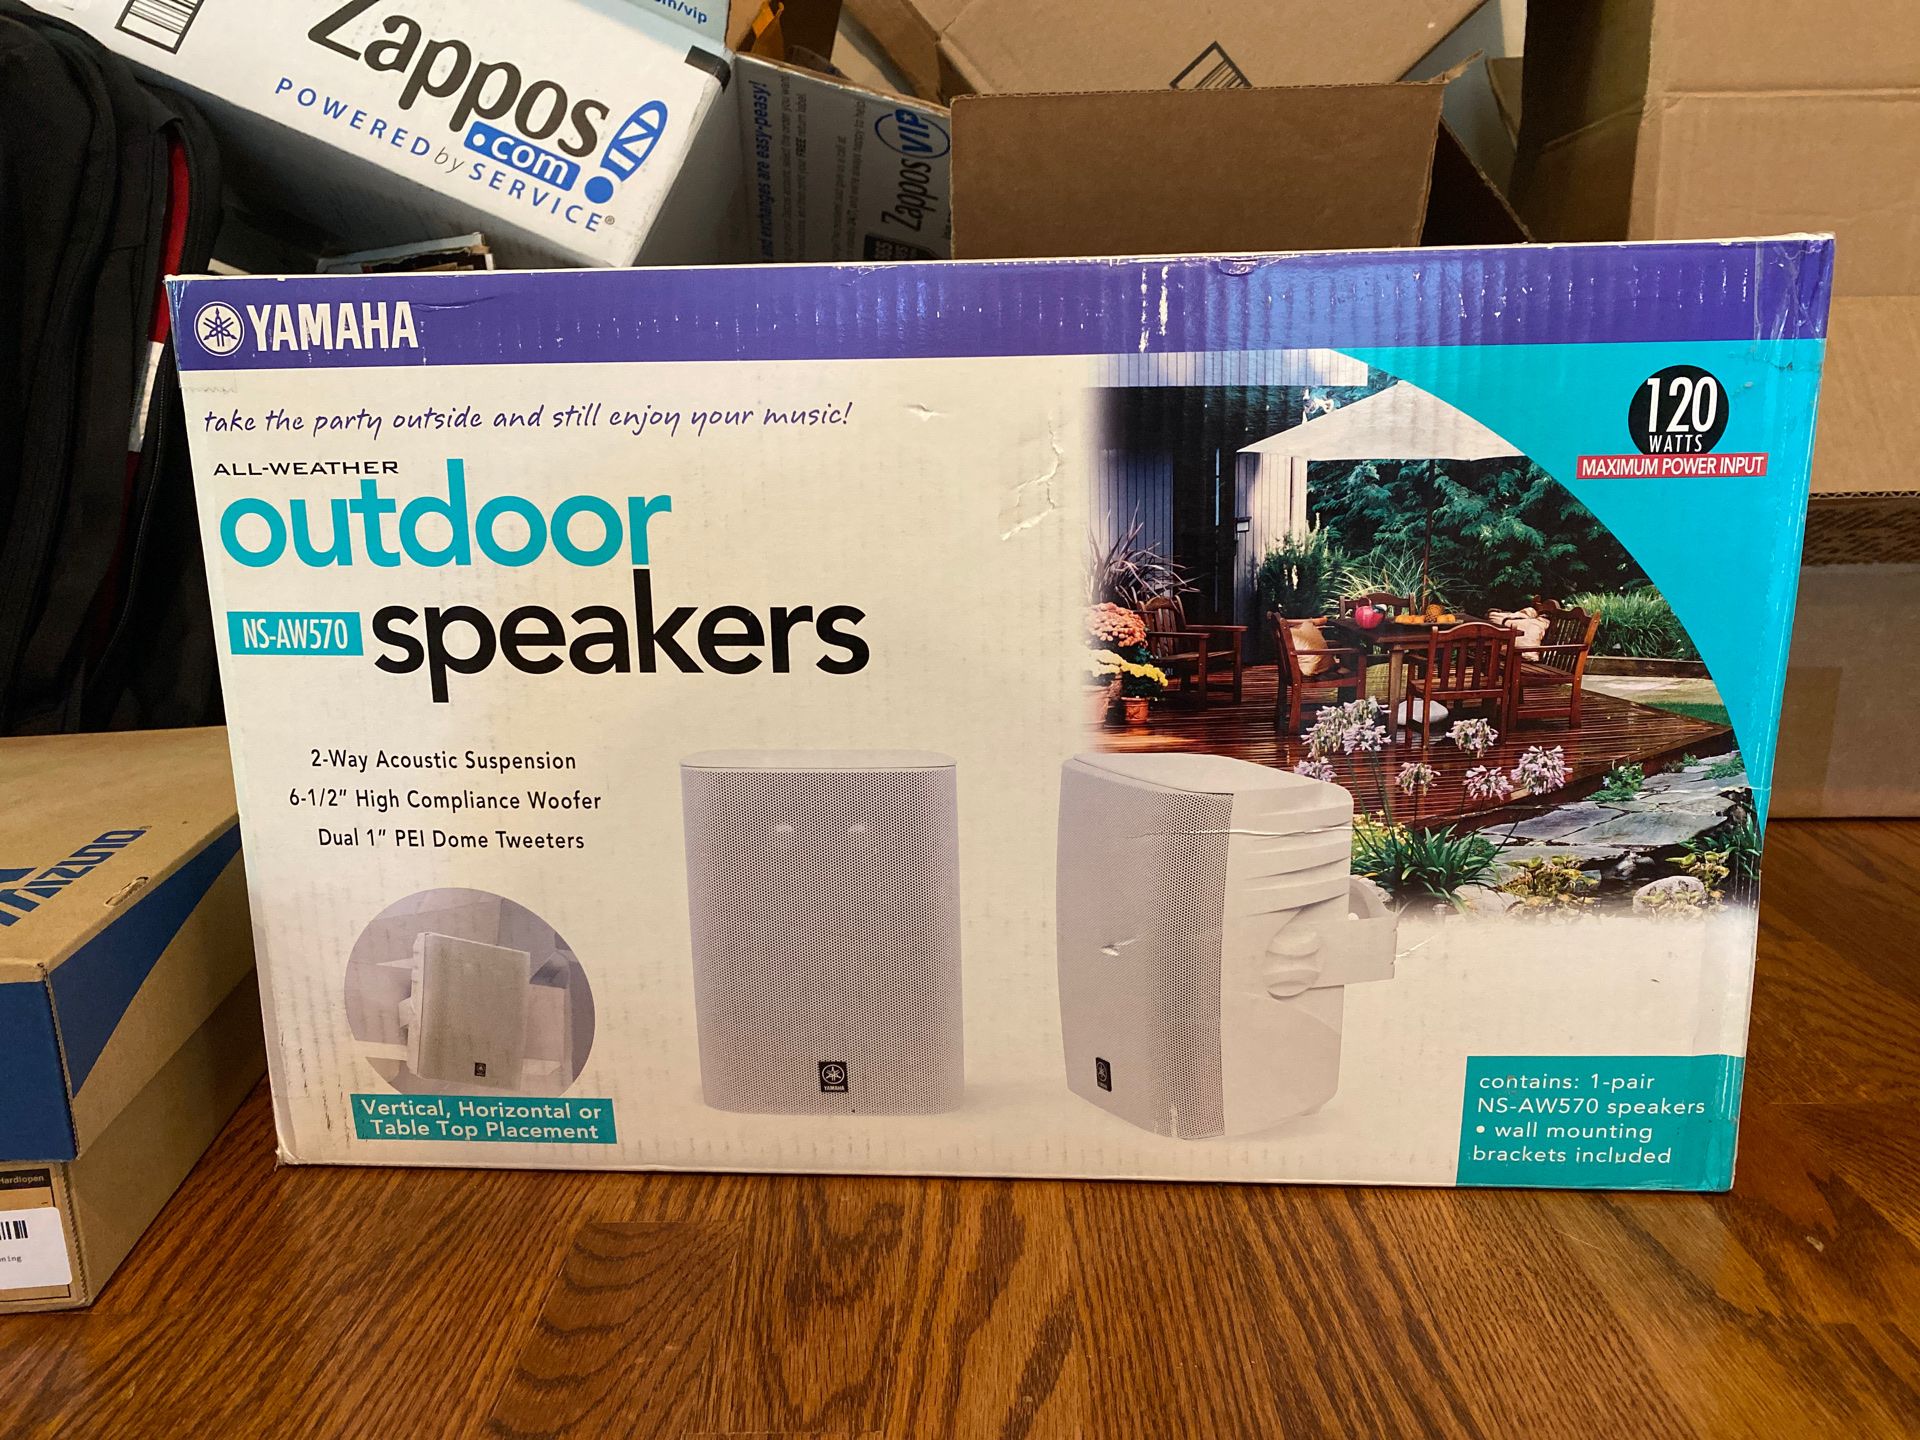 Yamaha all-weather outdoor speakers NS-AW570